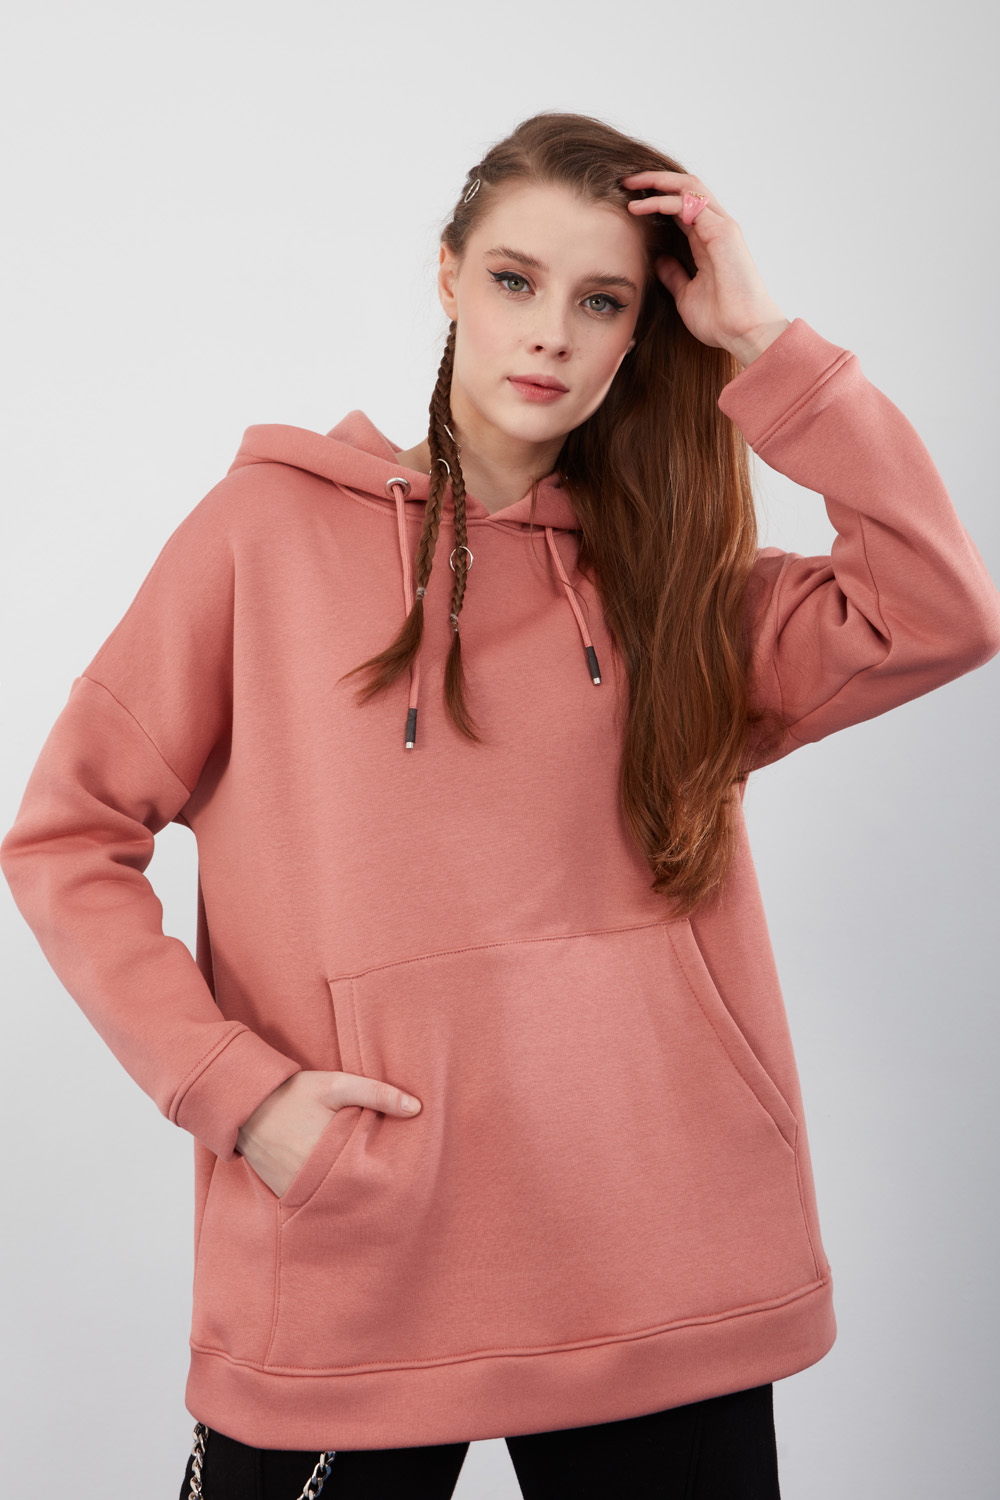 Rose Hooded Winter Sweatshirt with Pockets